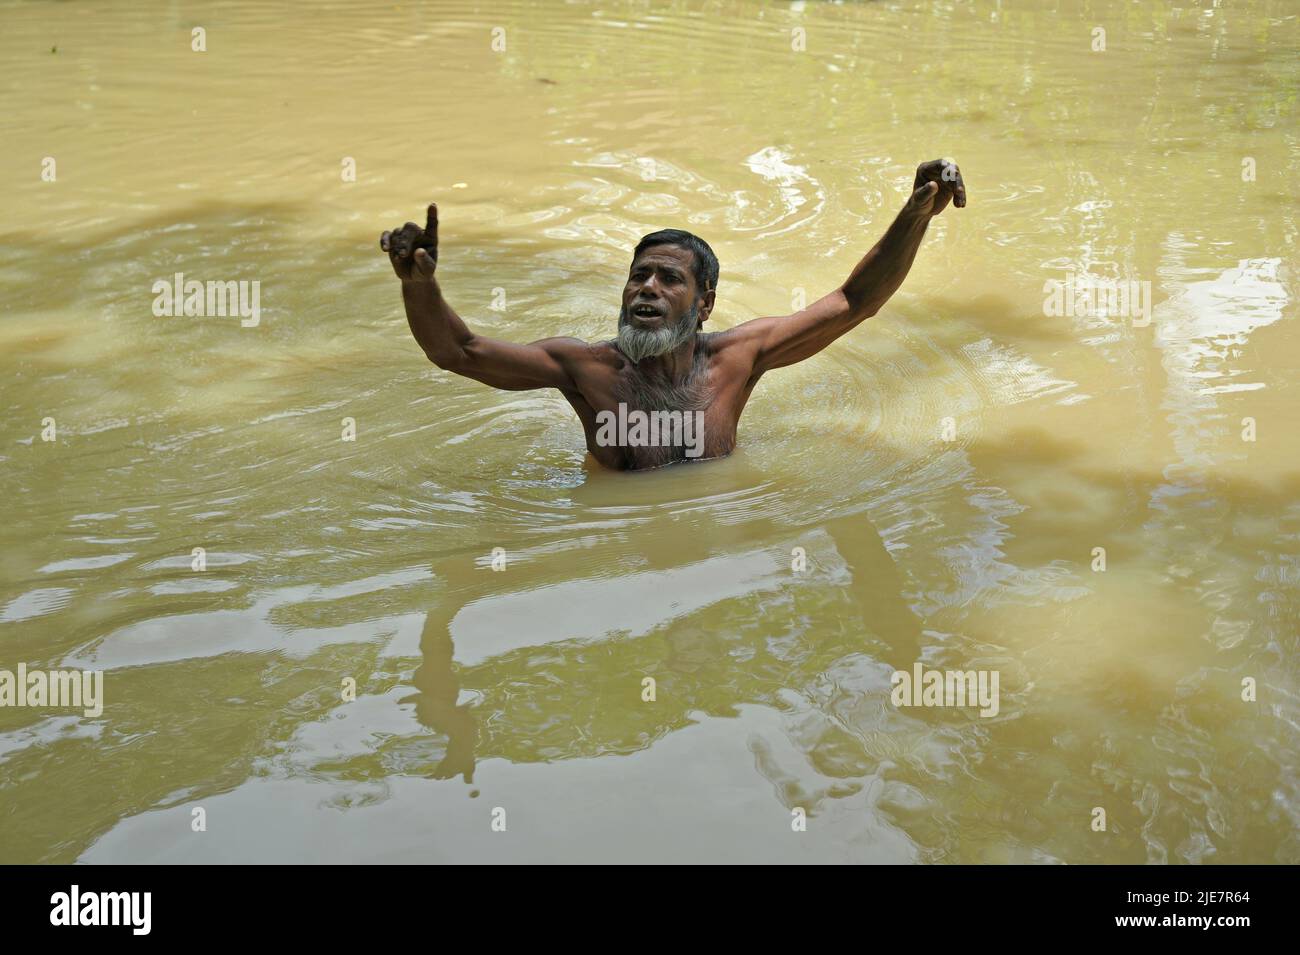 Sylhet, Mexico City, Bangladesh. 25th June, 2022. June 25, 2022, Sylhet, Bangladesh: a person swimming on the flood in the Badeswar area, The flood situation in some parts of Sylhet has worsened, with high water levels in the Kushiara River rising in the past 48 hours. According to the local office of the Bangladesh Water Development Board, the Kushiara was flowing above the danger level at various points. on June 25, 2022 in Sylhet, Bangladesh. (Credit Image: © Md Rafayat Haque Khan/eyepix via ZUMA Press Wire) Stock Photo